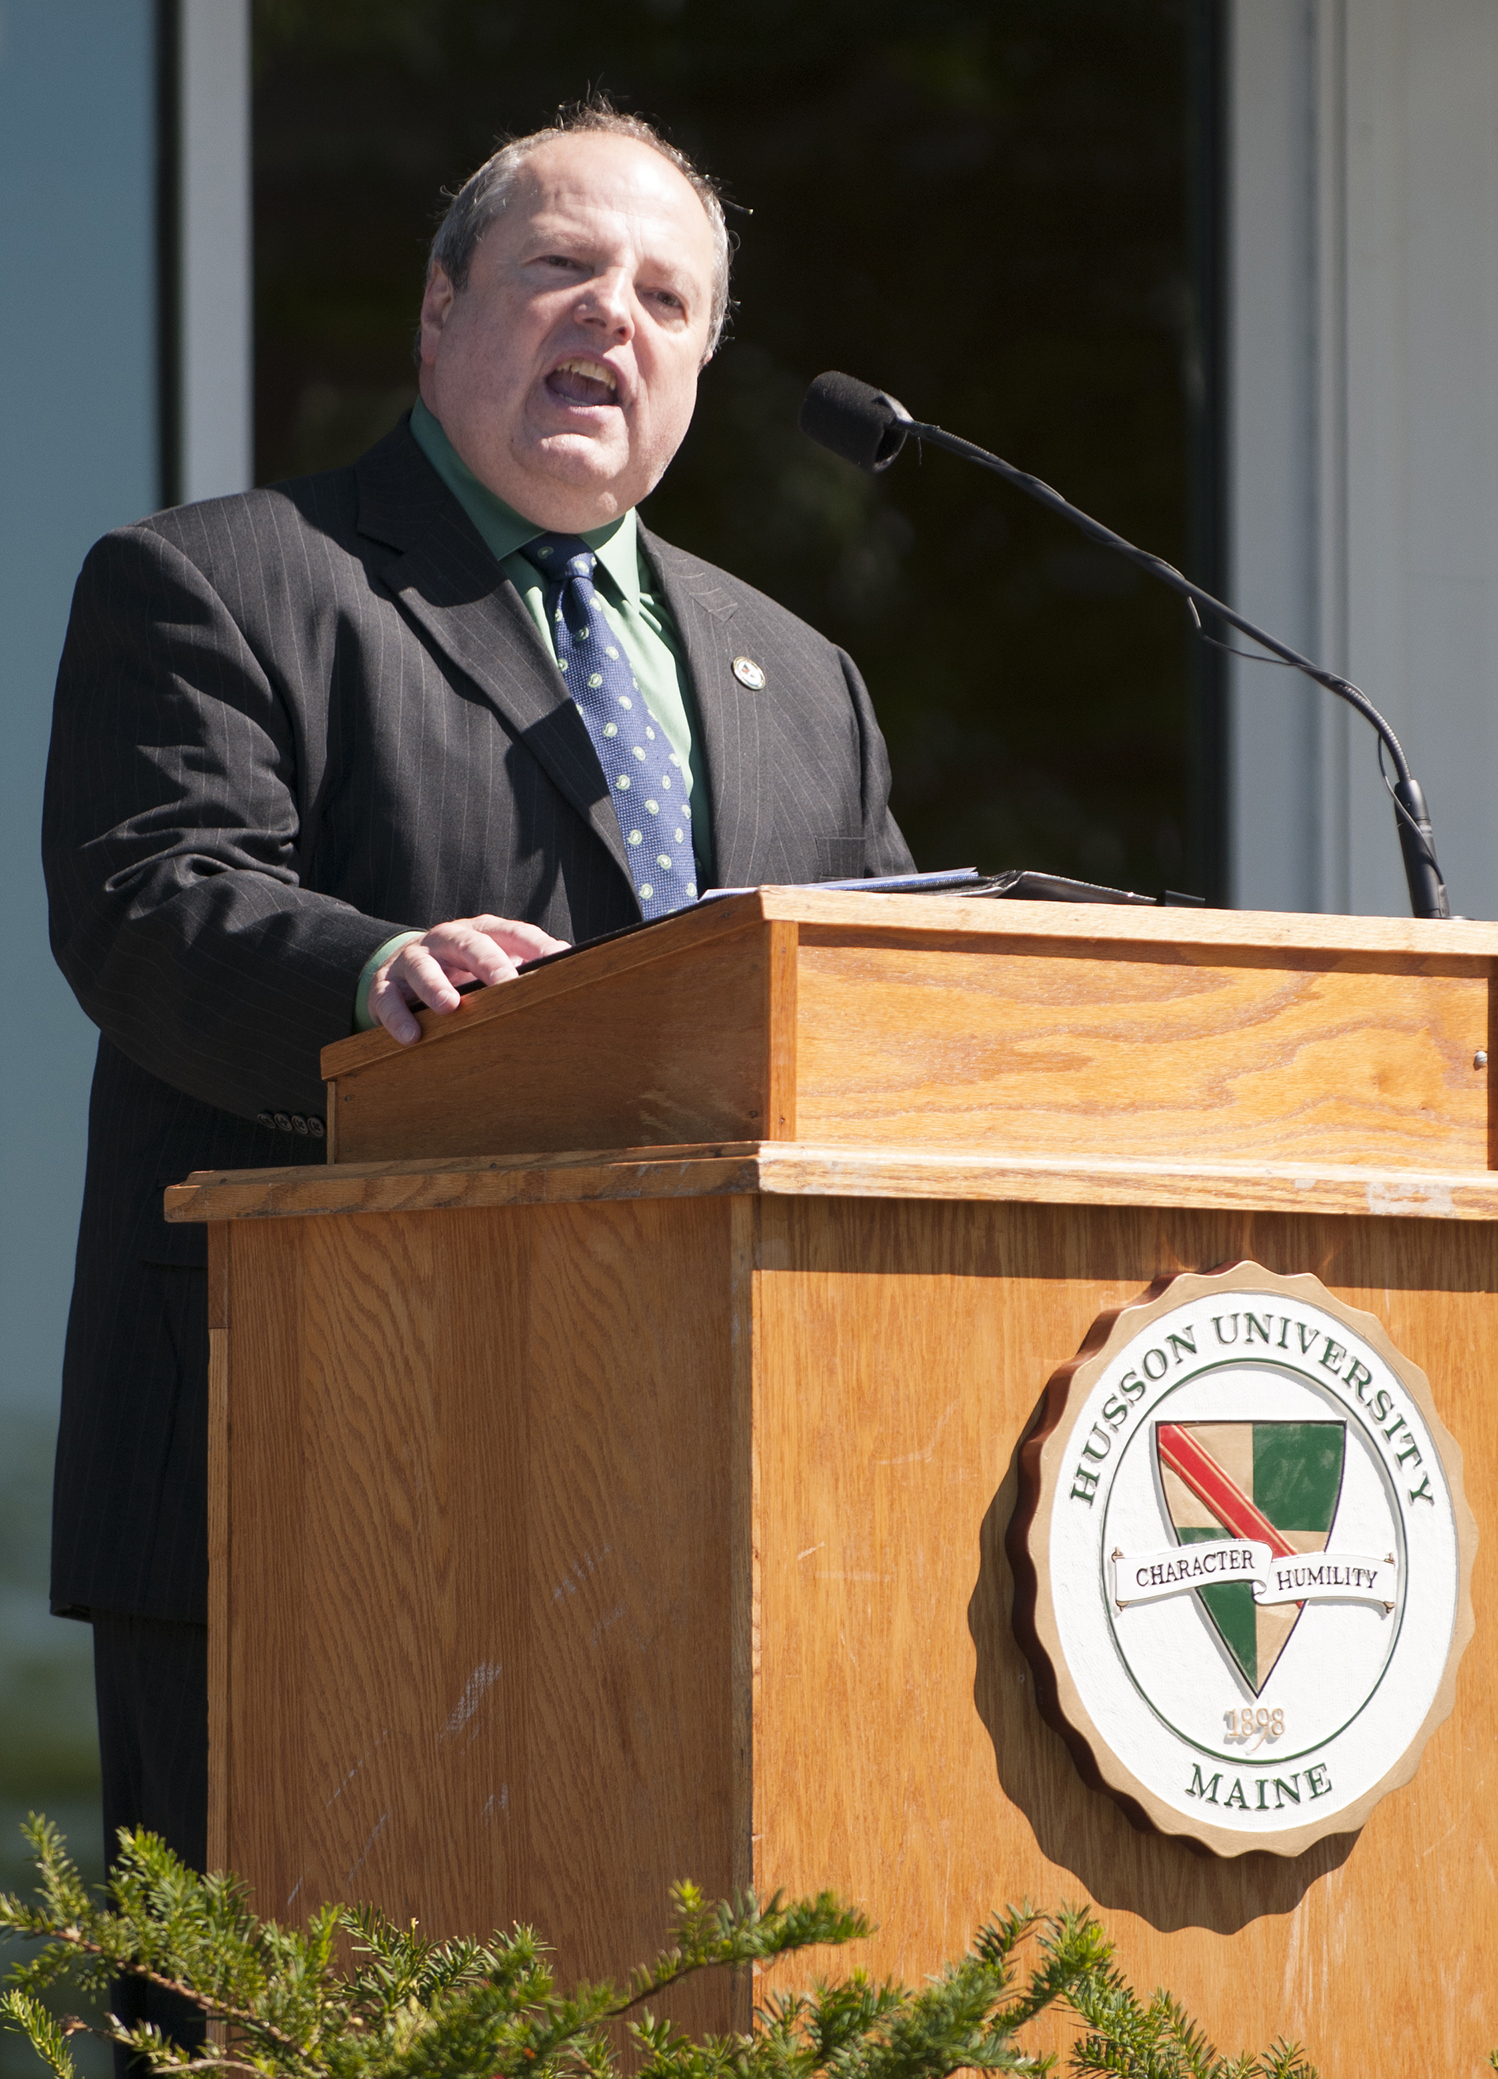 Husson University President and CEO Robert A. Clark, Ph.D, CFA, speaking at the dedication ceremony for the Ronan Center for Financial Technology.